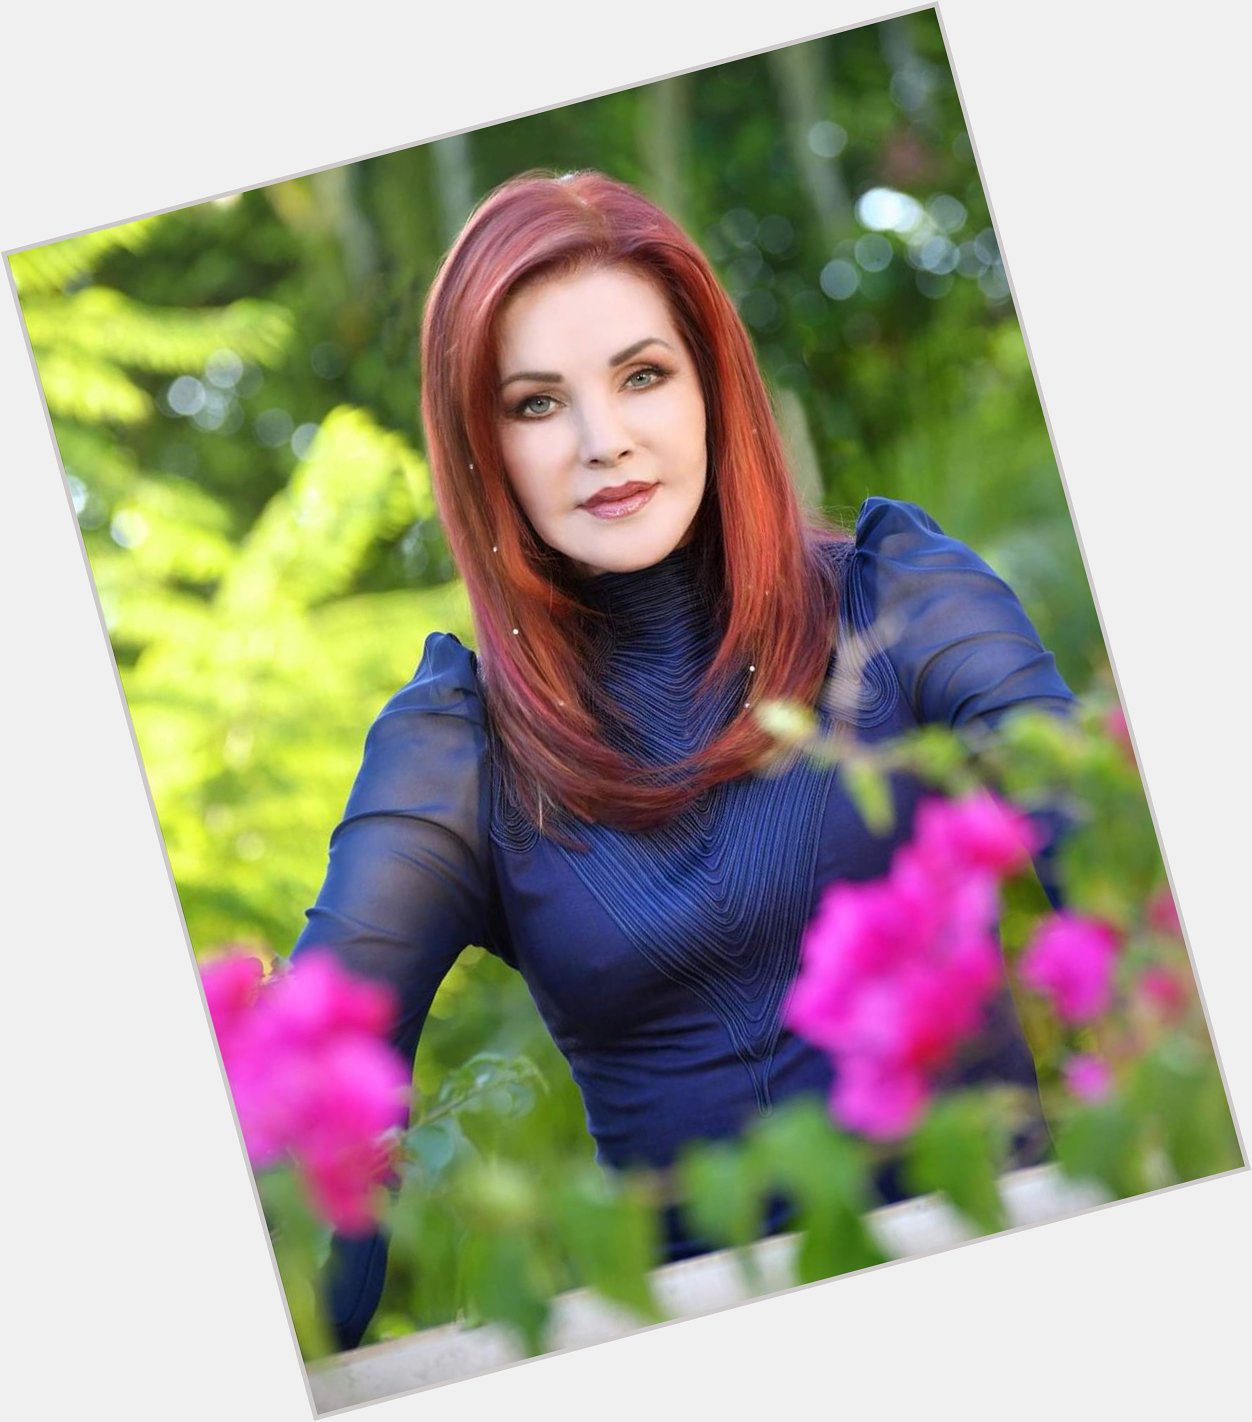 HAPPY BIRTHDAY TODAY TO PRISCILLA PRESLEY 
SHE IS 78 YEAR YOUNG    Love life ... 